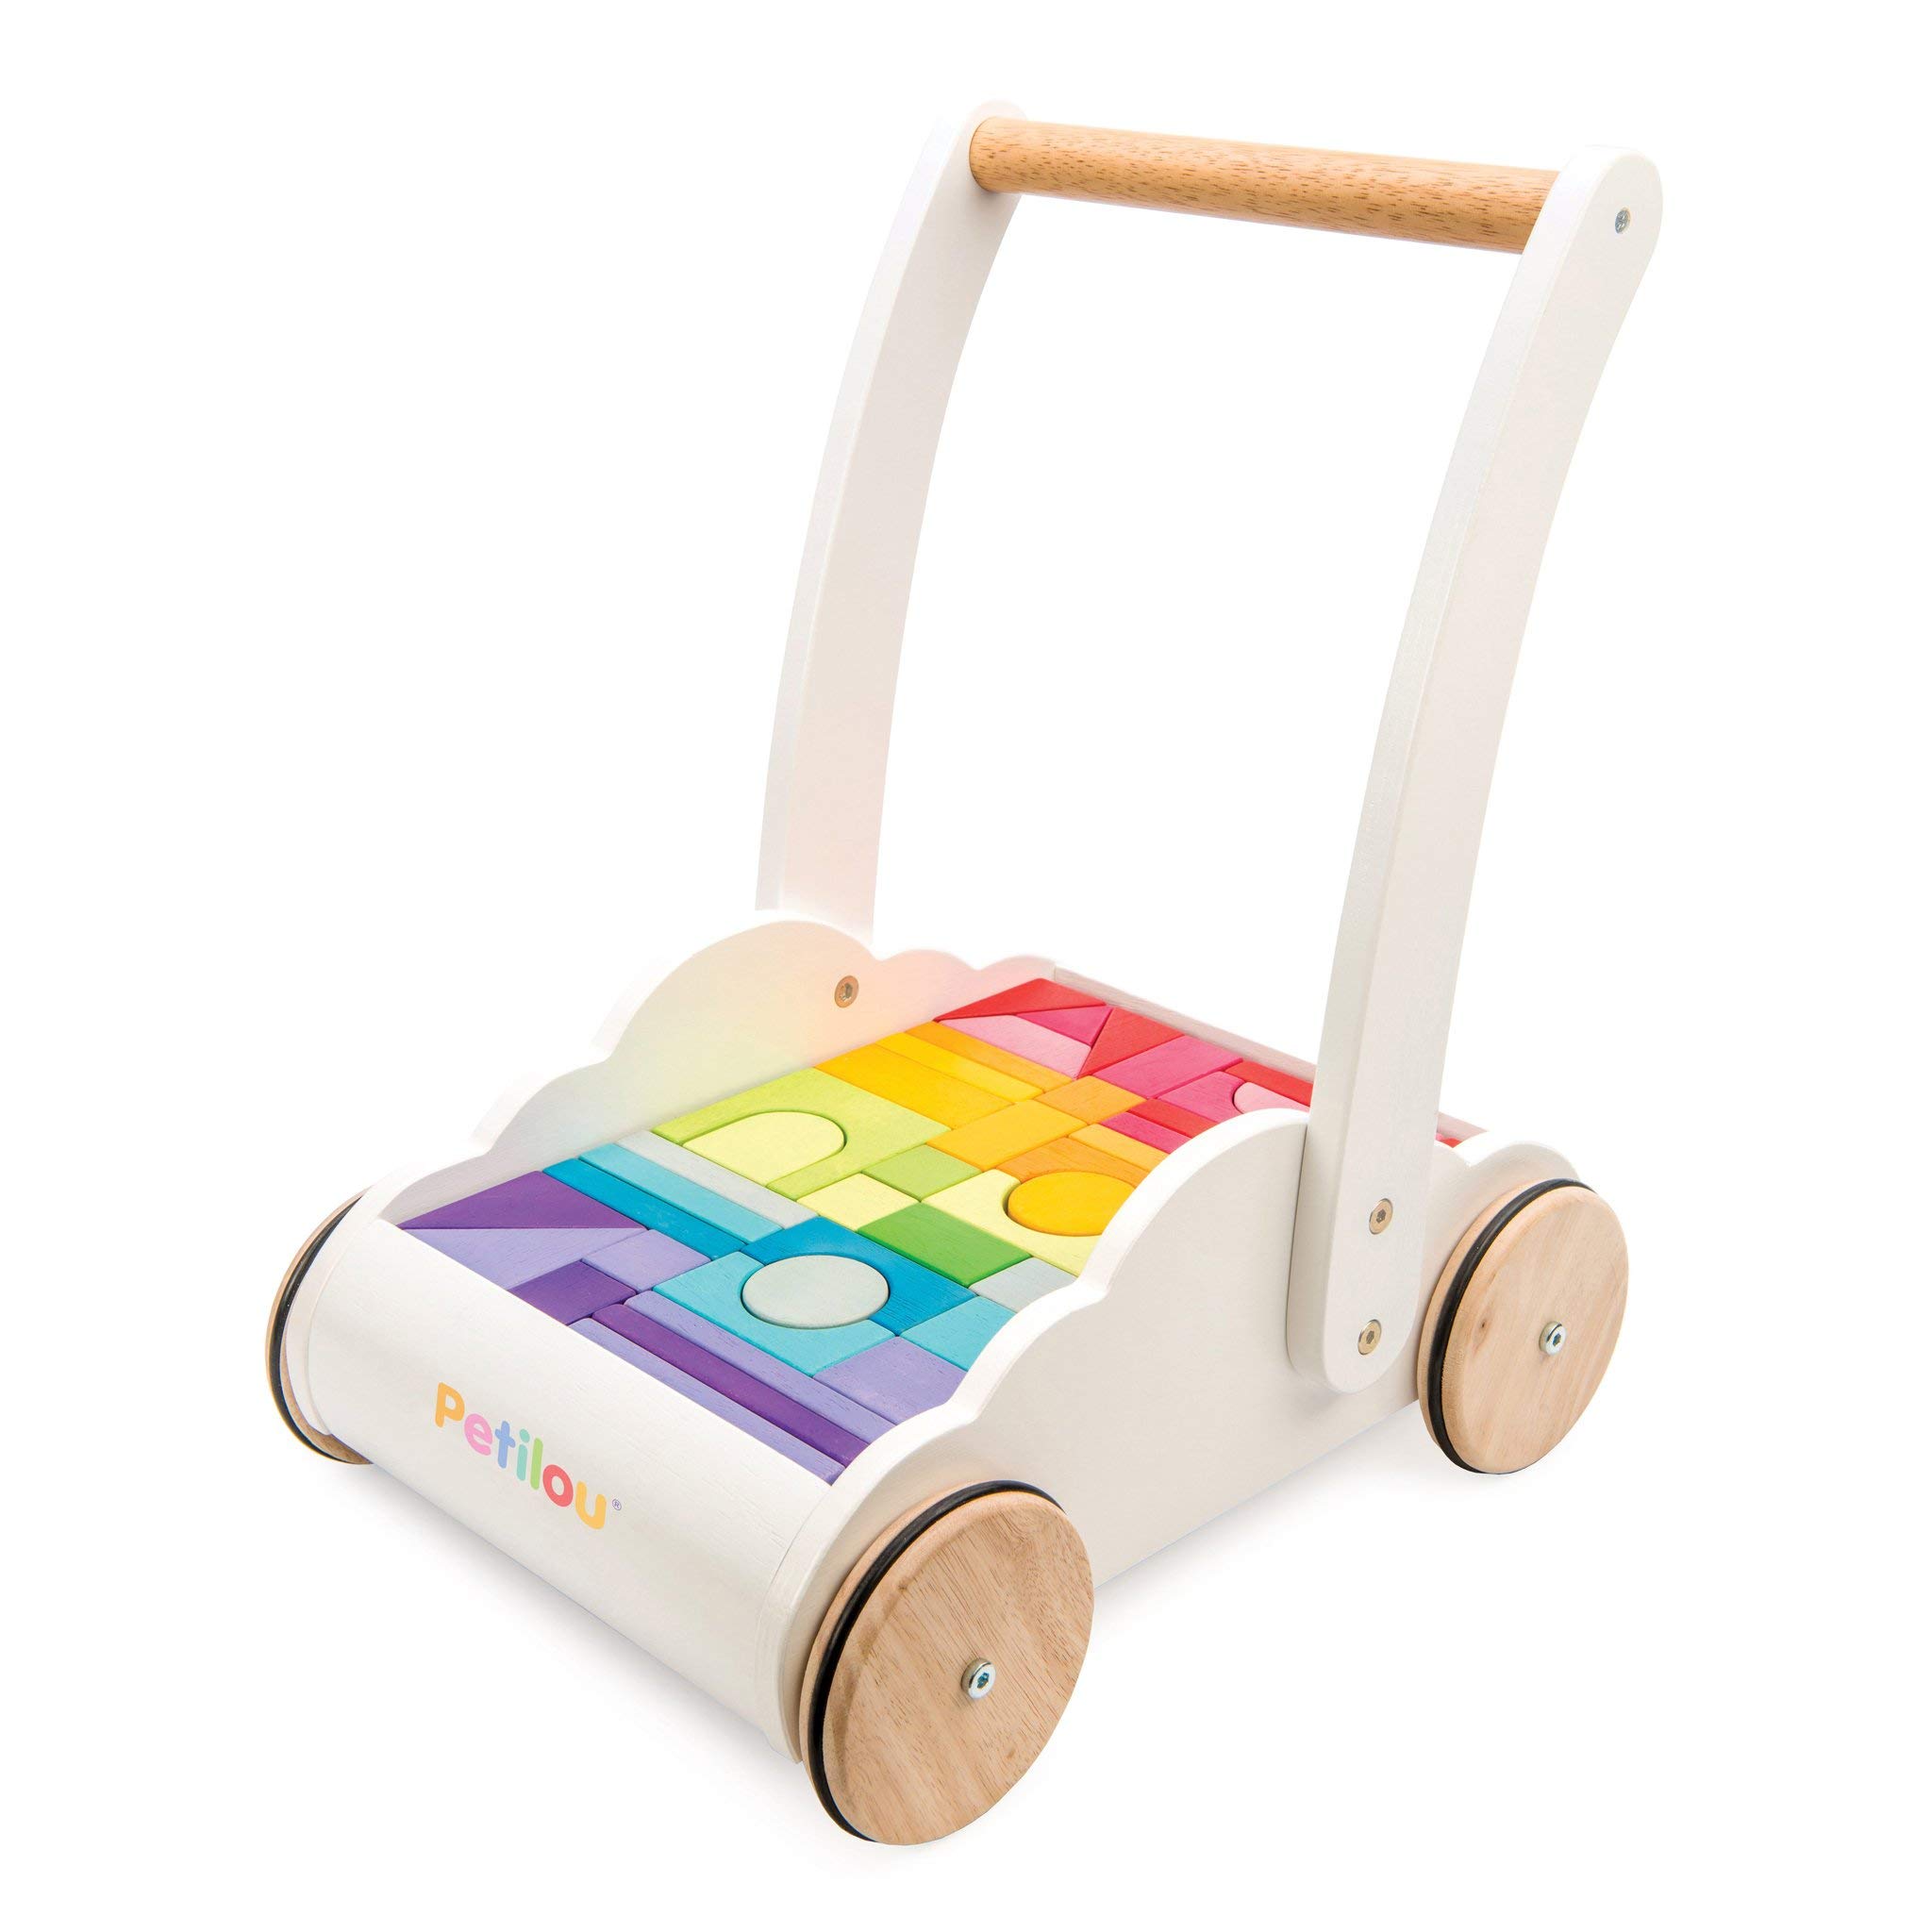 Le Toy Van - Petilou Wooden Walker Toy for Toddlers and Babies | Educational Rainbow Cloud Walker | Suitable for A Boy Or Girl 1 Year Old +, Multi, 45 Blocks (PL102)